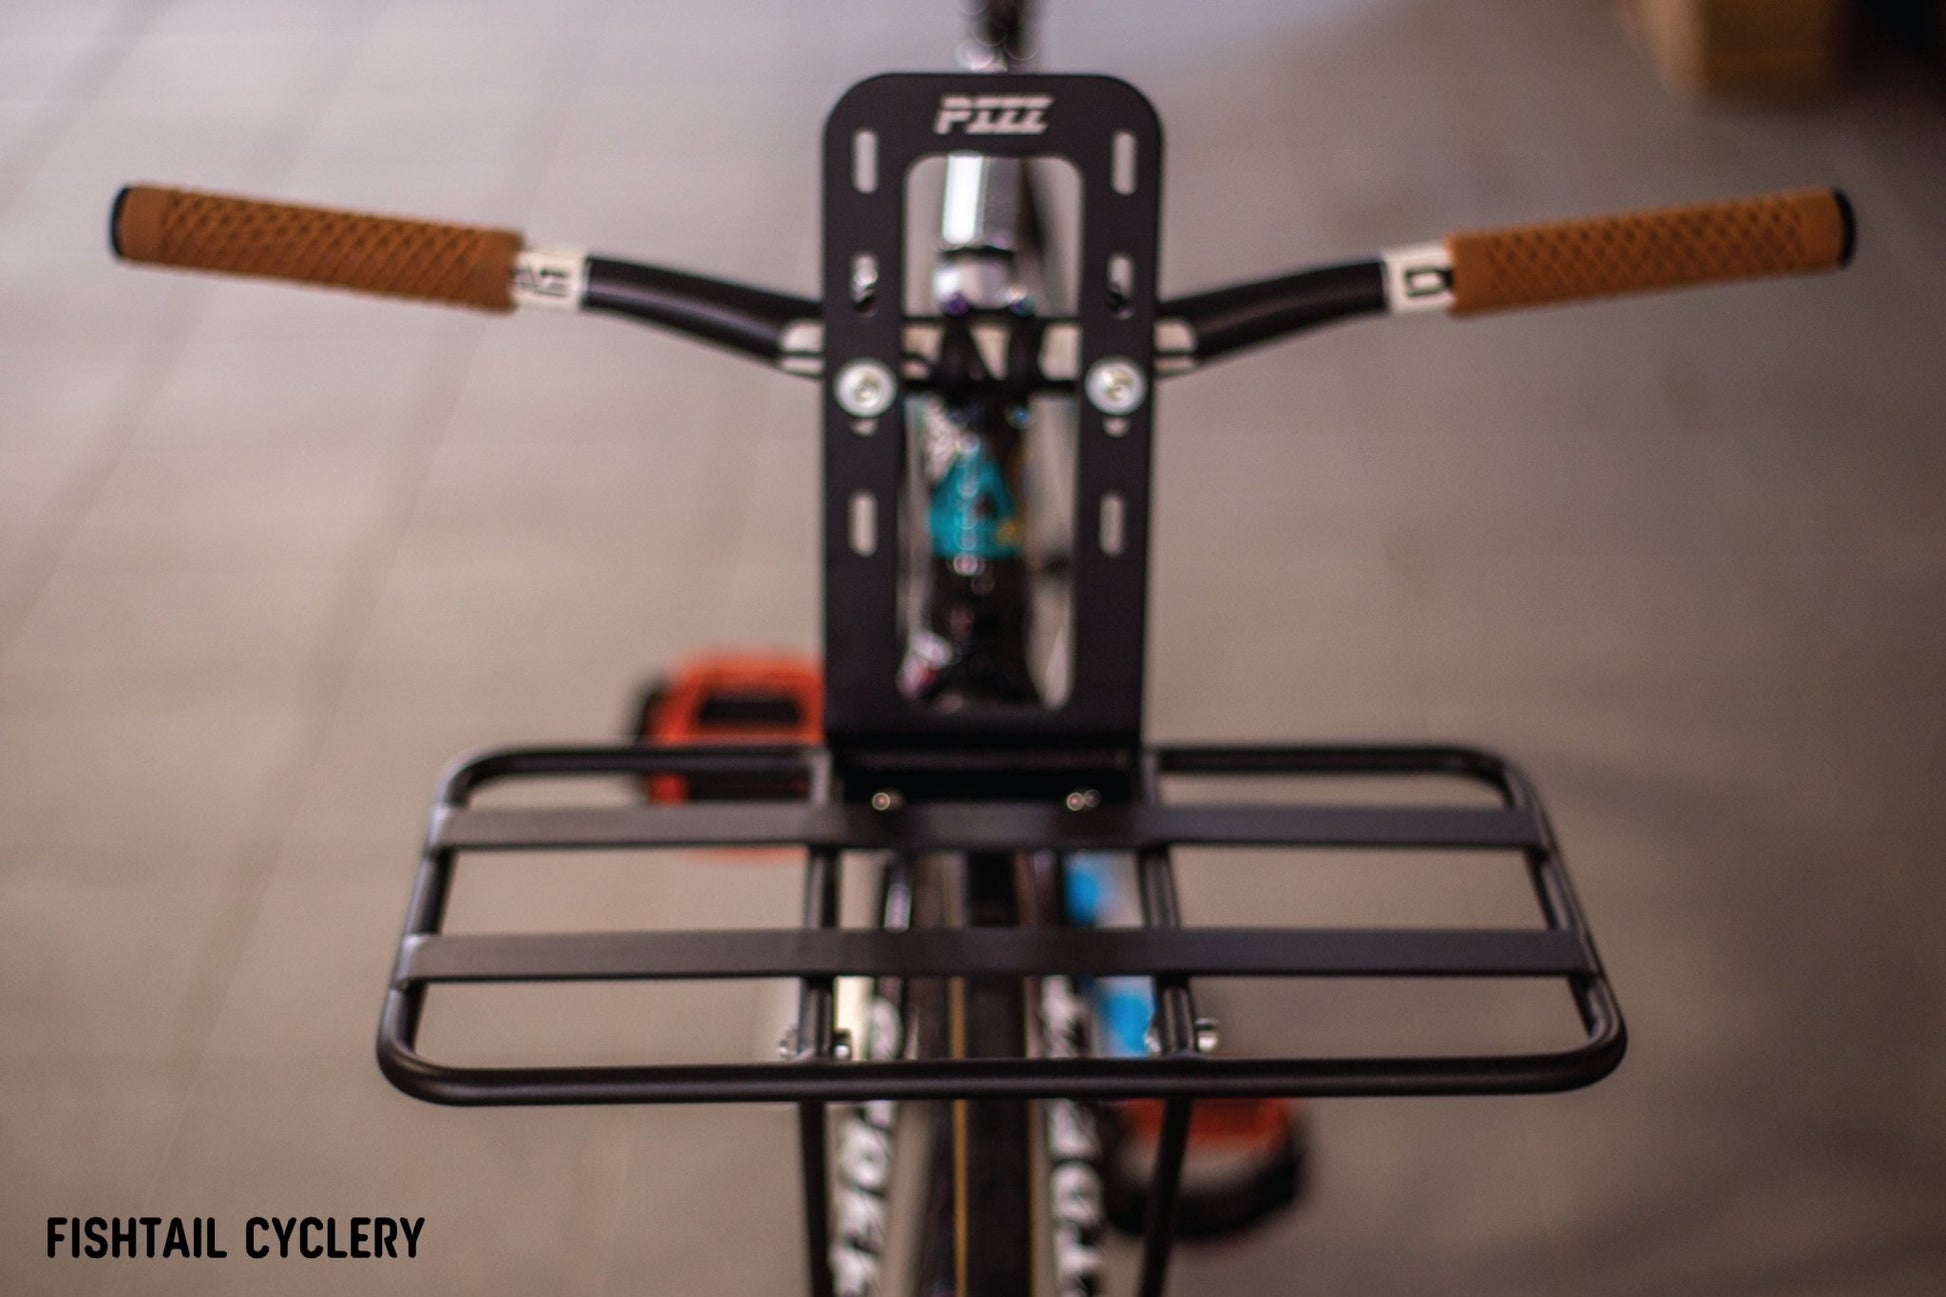 PIZZ - PIZZ Front Cargo Rack - FISHTAIL CYCLERY